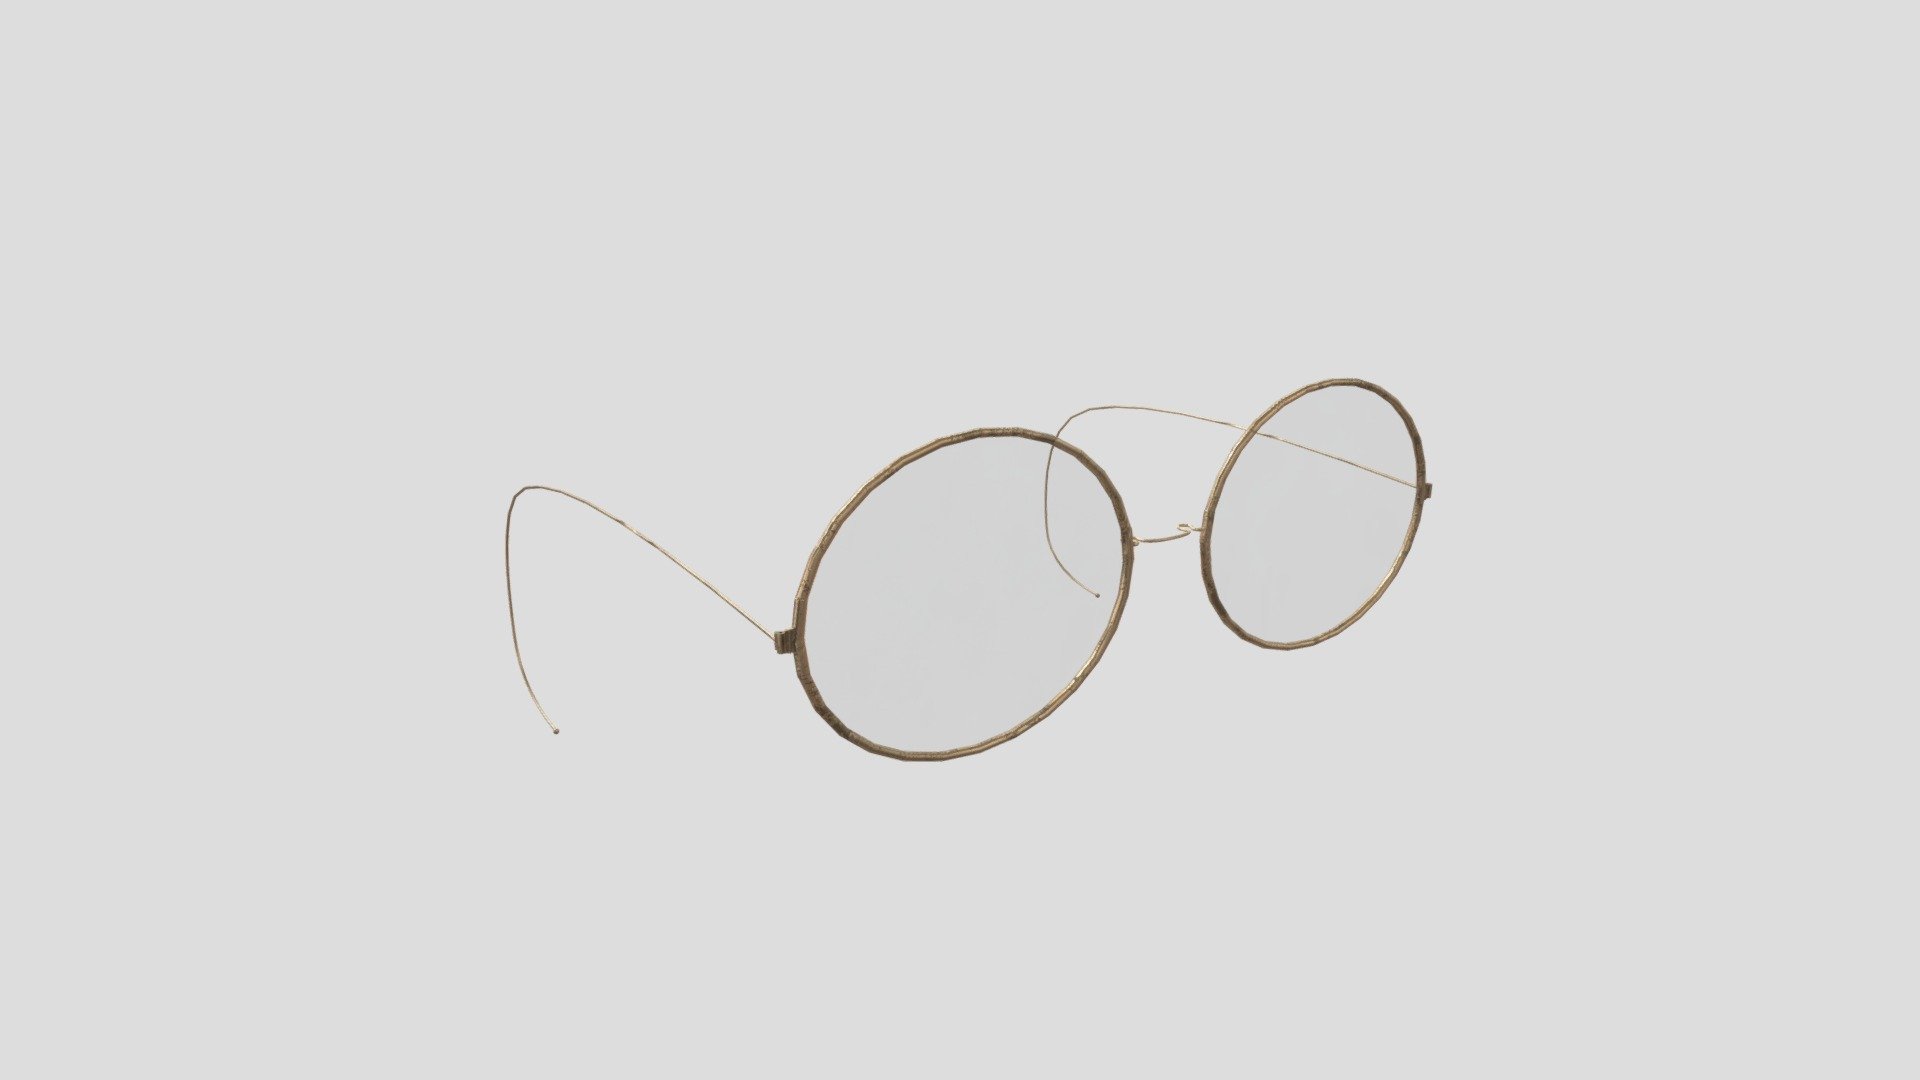 Model based on 1910 glasses

Textured in 3 parts so it could be animated

Textured to look old and boken 

Textures 2048x2048

Painted in Substance Painter - Old Glasses - Buy Royalty Free 3D model by Paubr 3d model